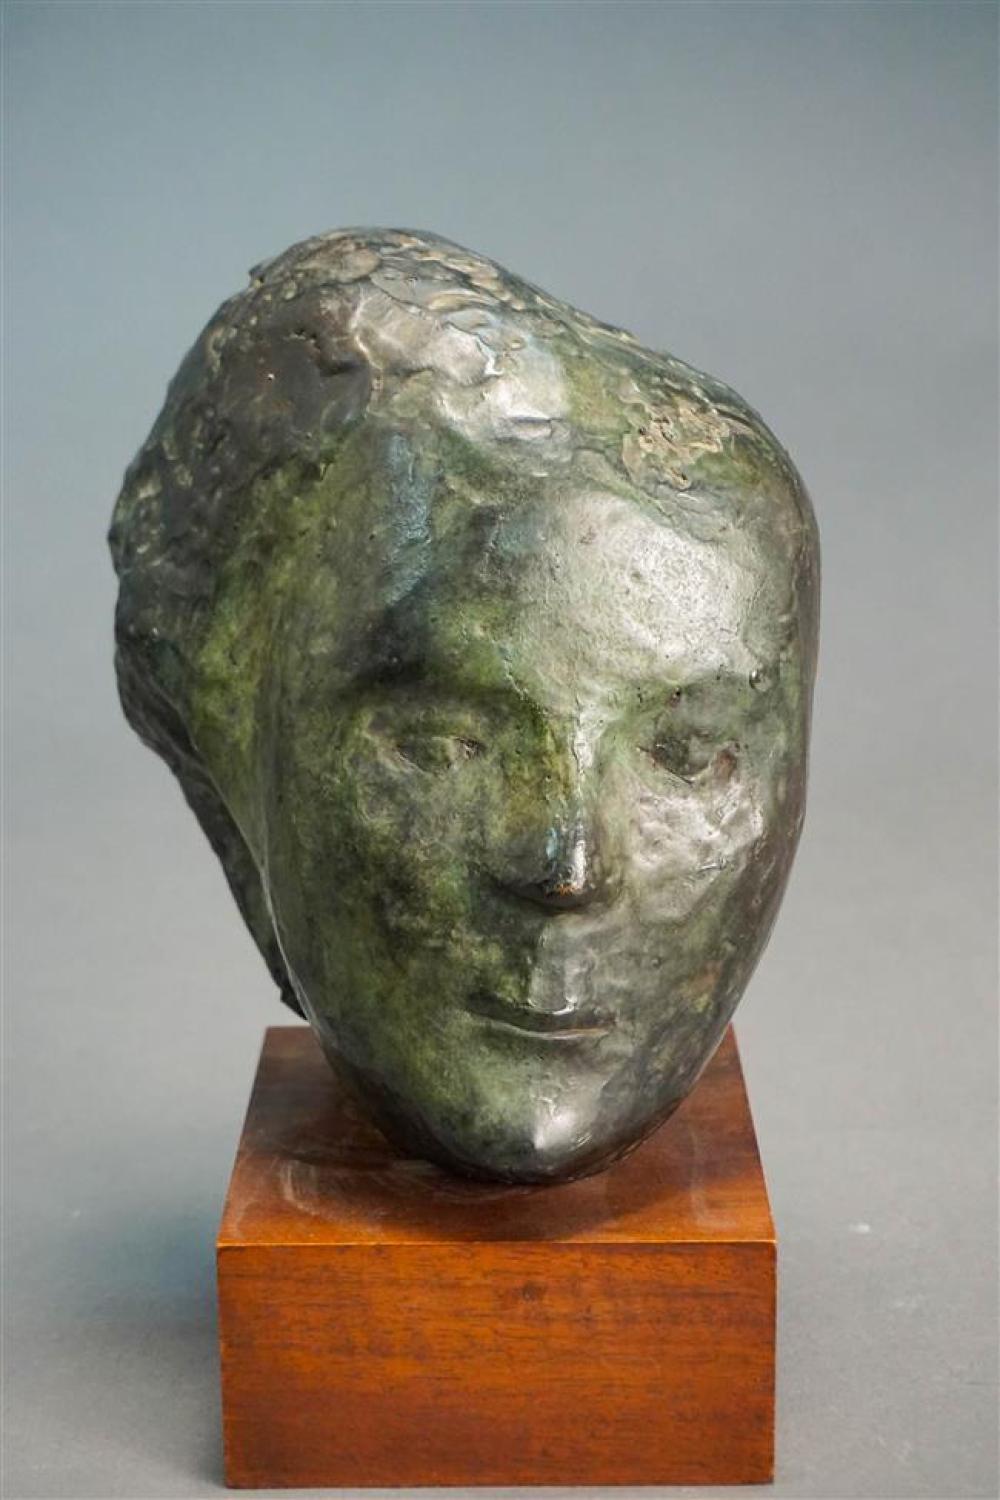 BRONZE BUST OF A WOMAN ON WOOD